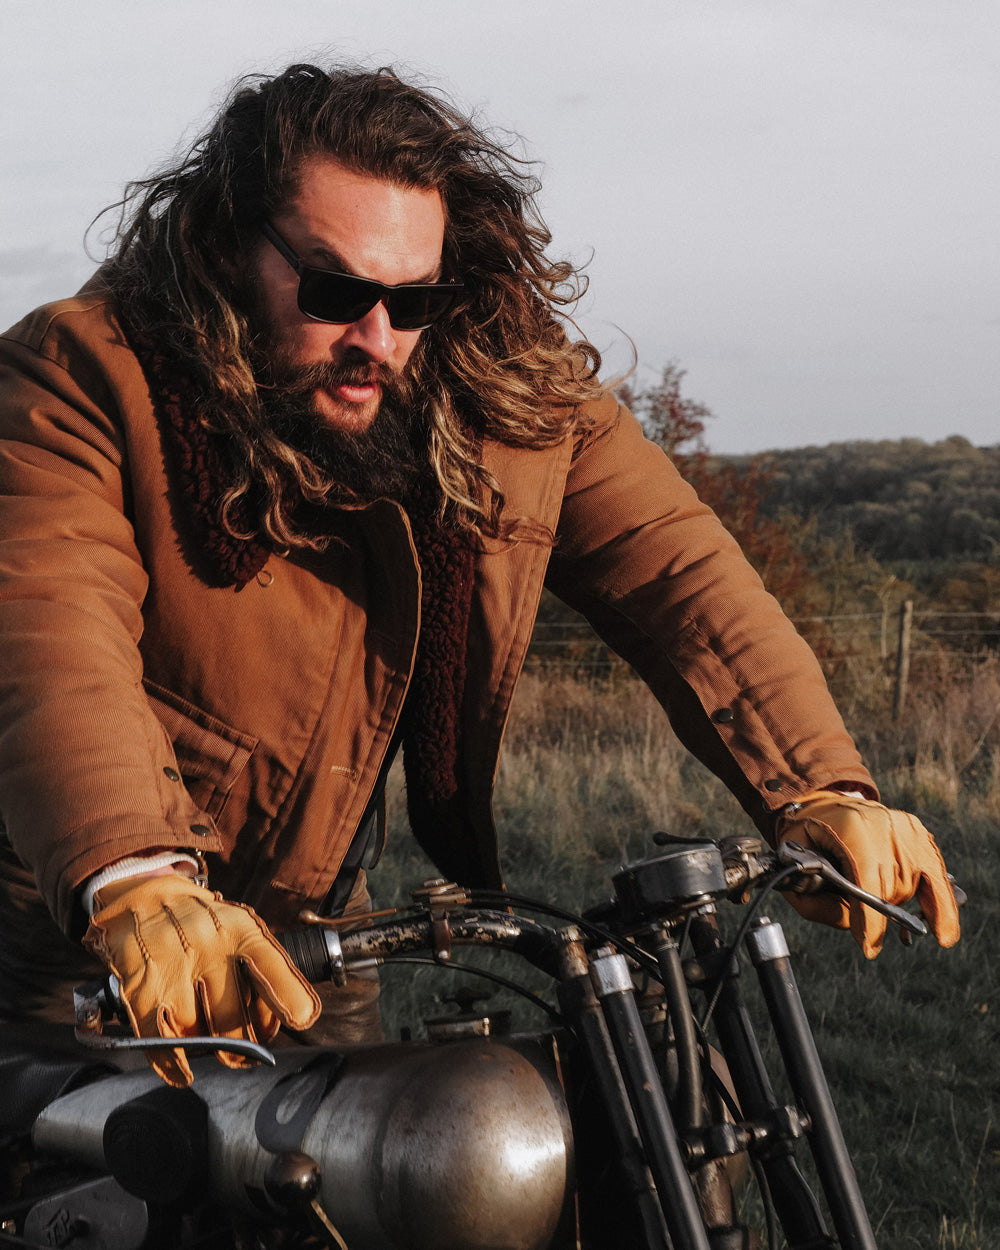 So iLL x On The Roam x Electric sunglasses by jason momoa shown being worn by jason momoa on a motorcycle